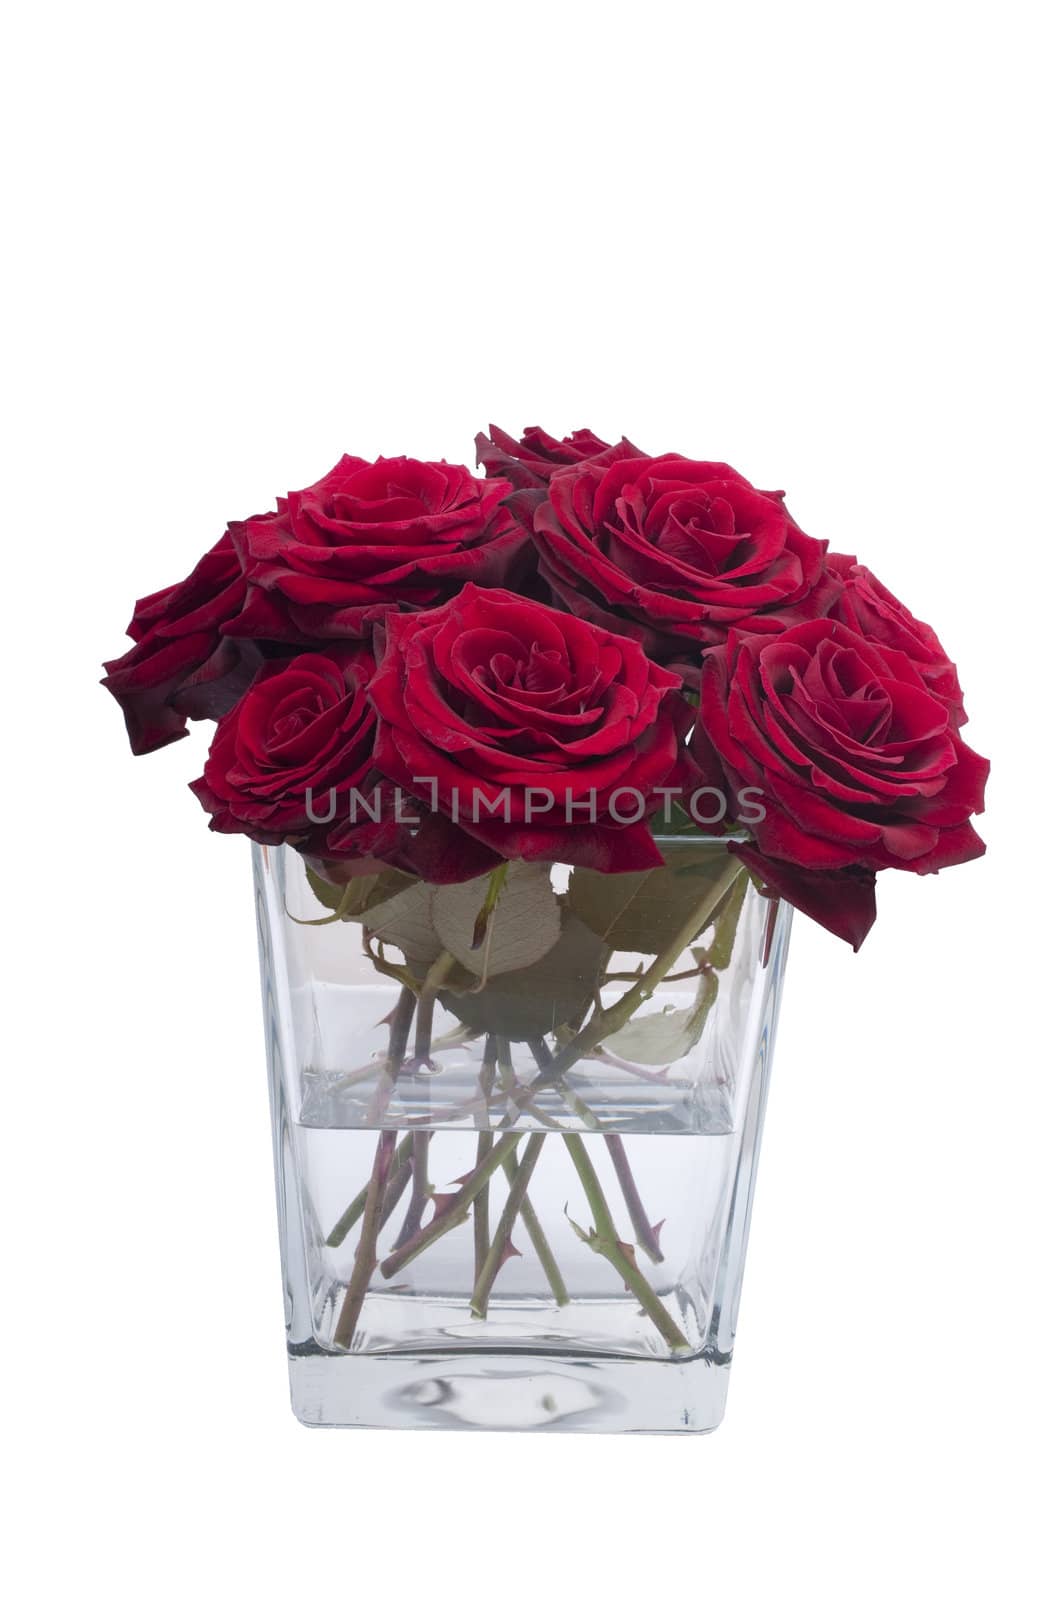 Bunch of red rose flowers in a small vase